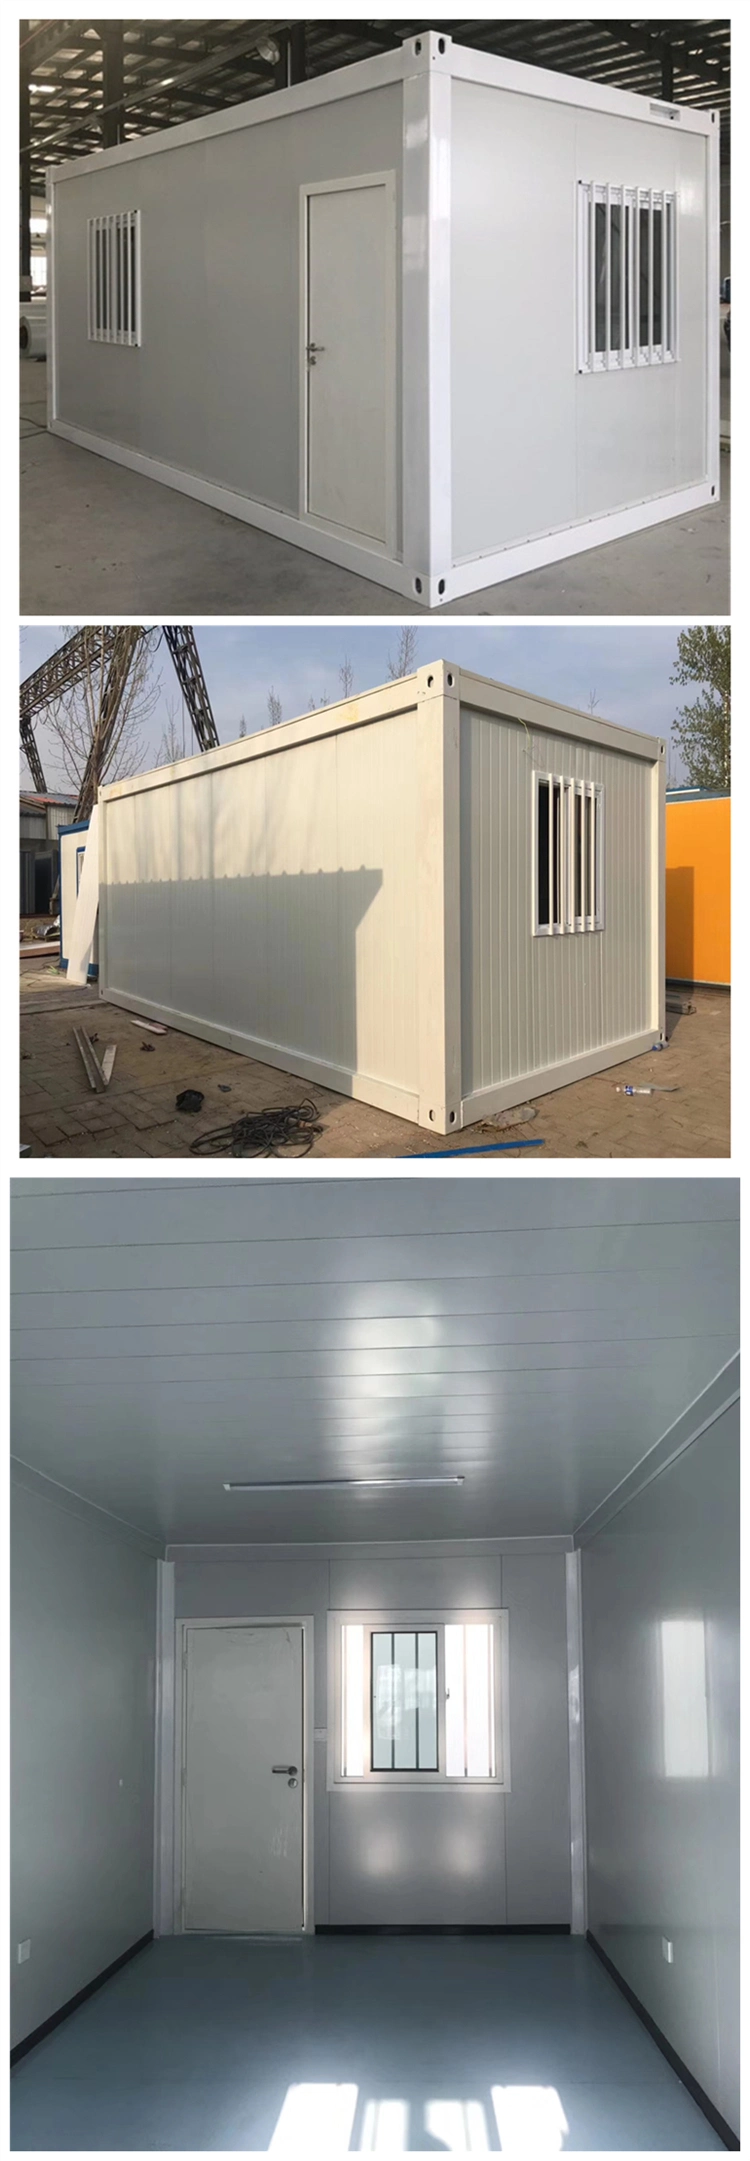 Fireproof Flat Pack Container House Waterproof Heat Proof Earthquake-Proof Container Home Maker